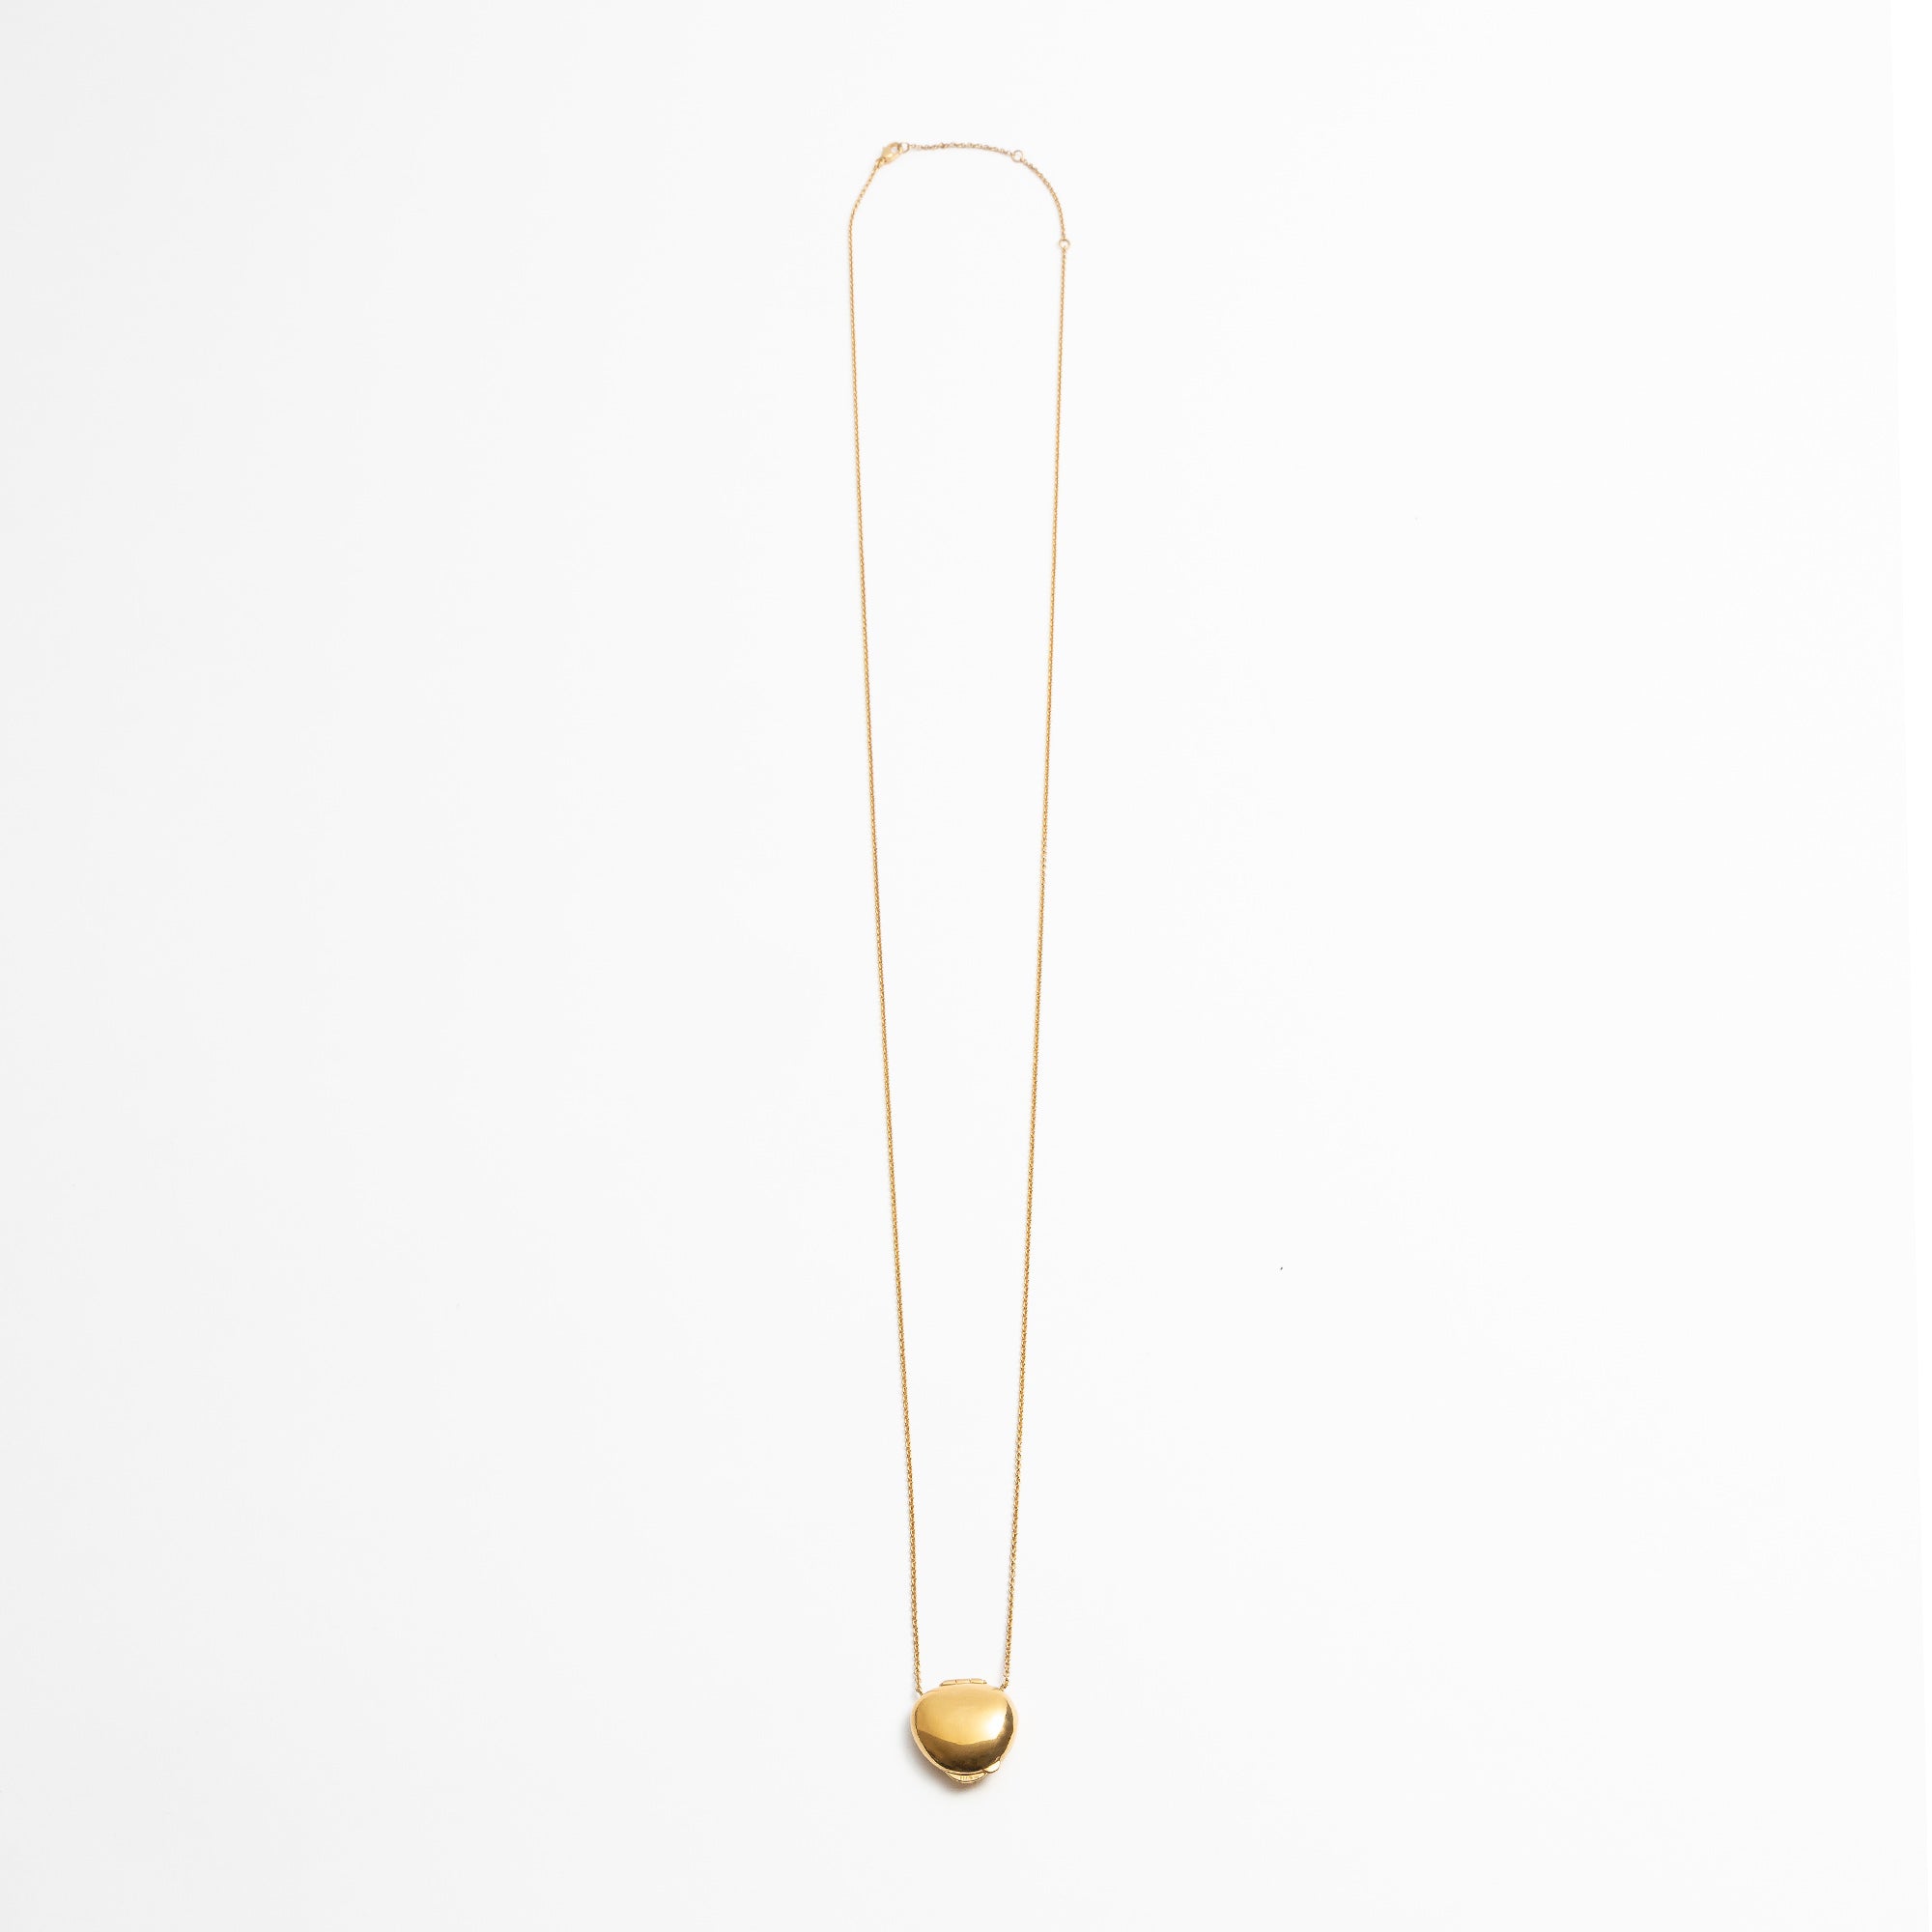 Essence Stone Necklace.S -Gold-